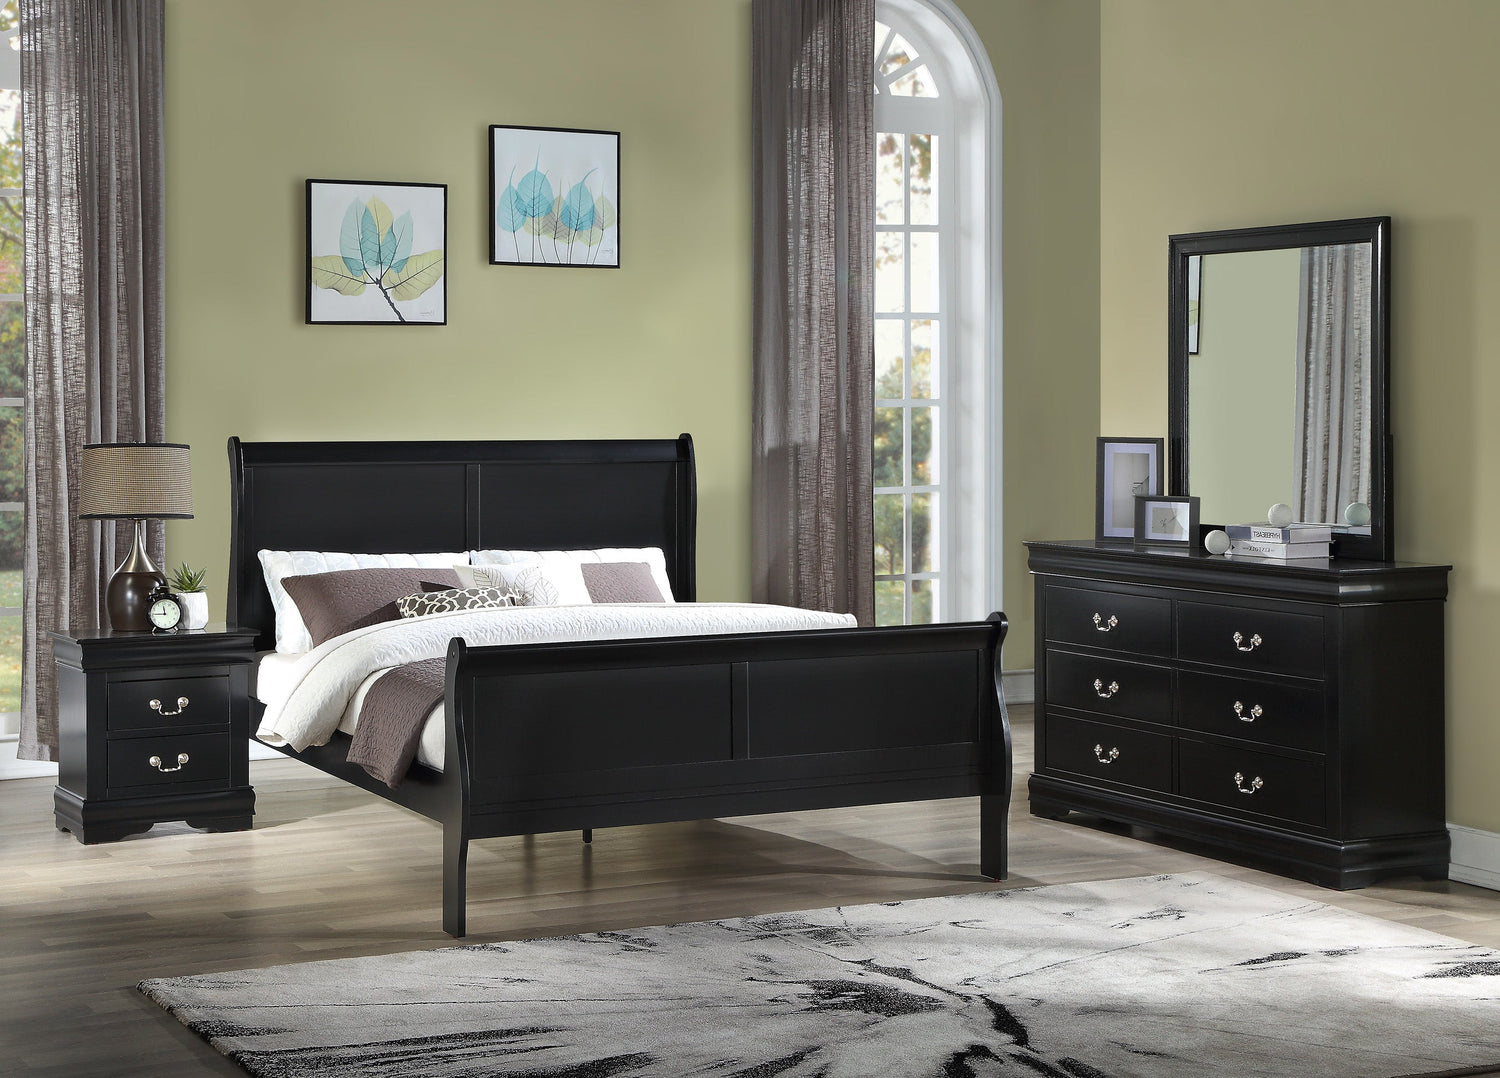 Louis Philippe Youth Sleigh Bedroom Set (Cherry)